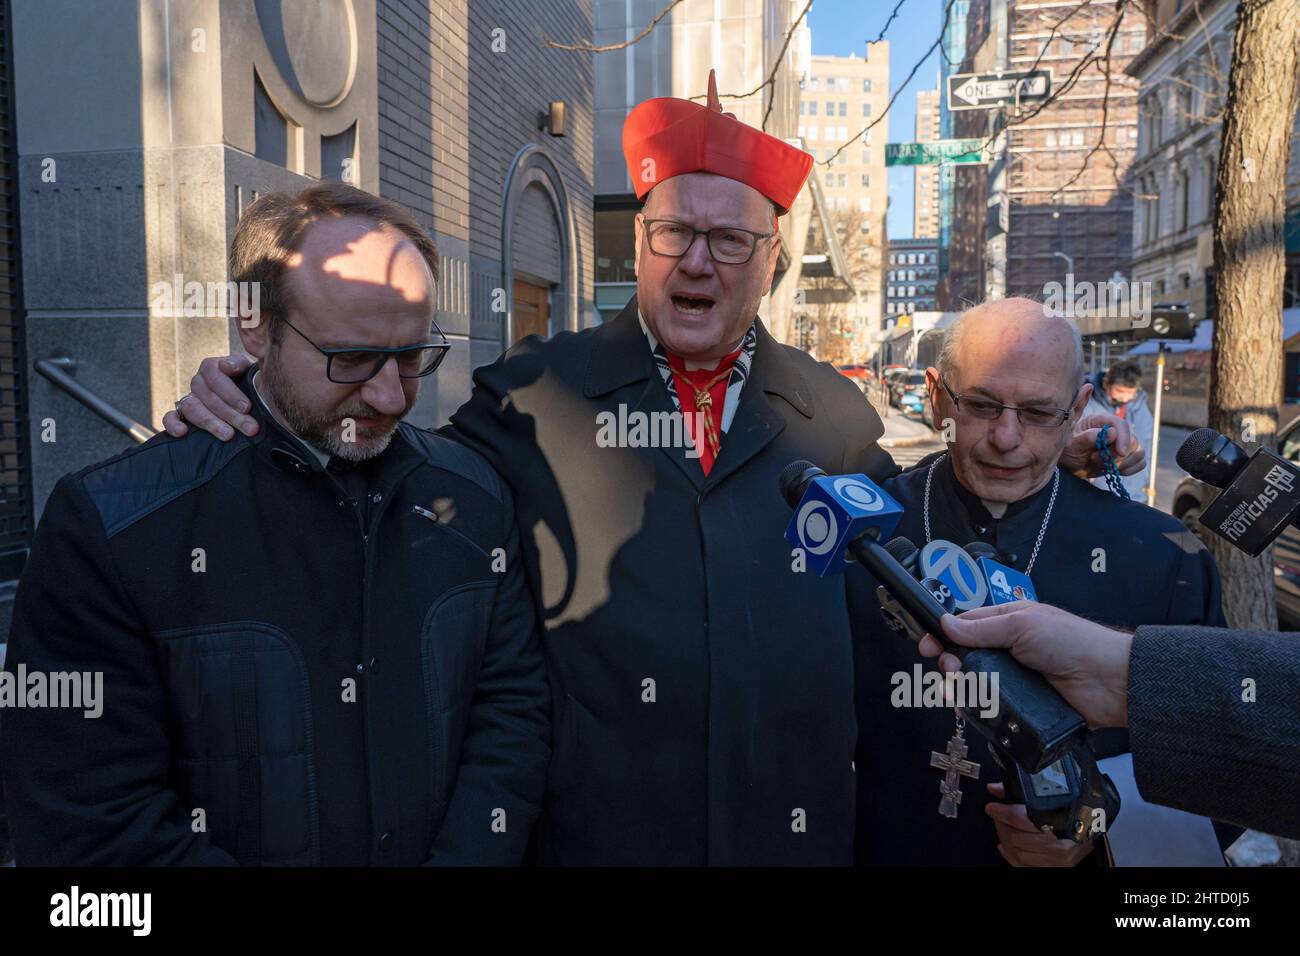 New York, United States. 27th Feb, 2022. Cardinal Timothy Dolan (C) standing with Father Illya (L) and Father Peter (R) speaks to media outside St. George's Church in New York City. His Eminence, Cardinal Timothy Dolan, Archbishop of New York attended mass at St. George's Church, which is a member of the Ukrainian Greek Catholic Church, in solidarity with the Ukrainian people. Credit: SOPA Images Limited/Alamy Live News Stock Photo